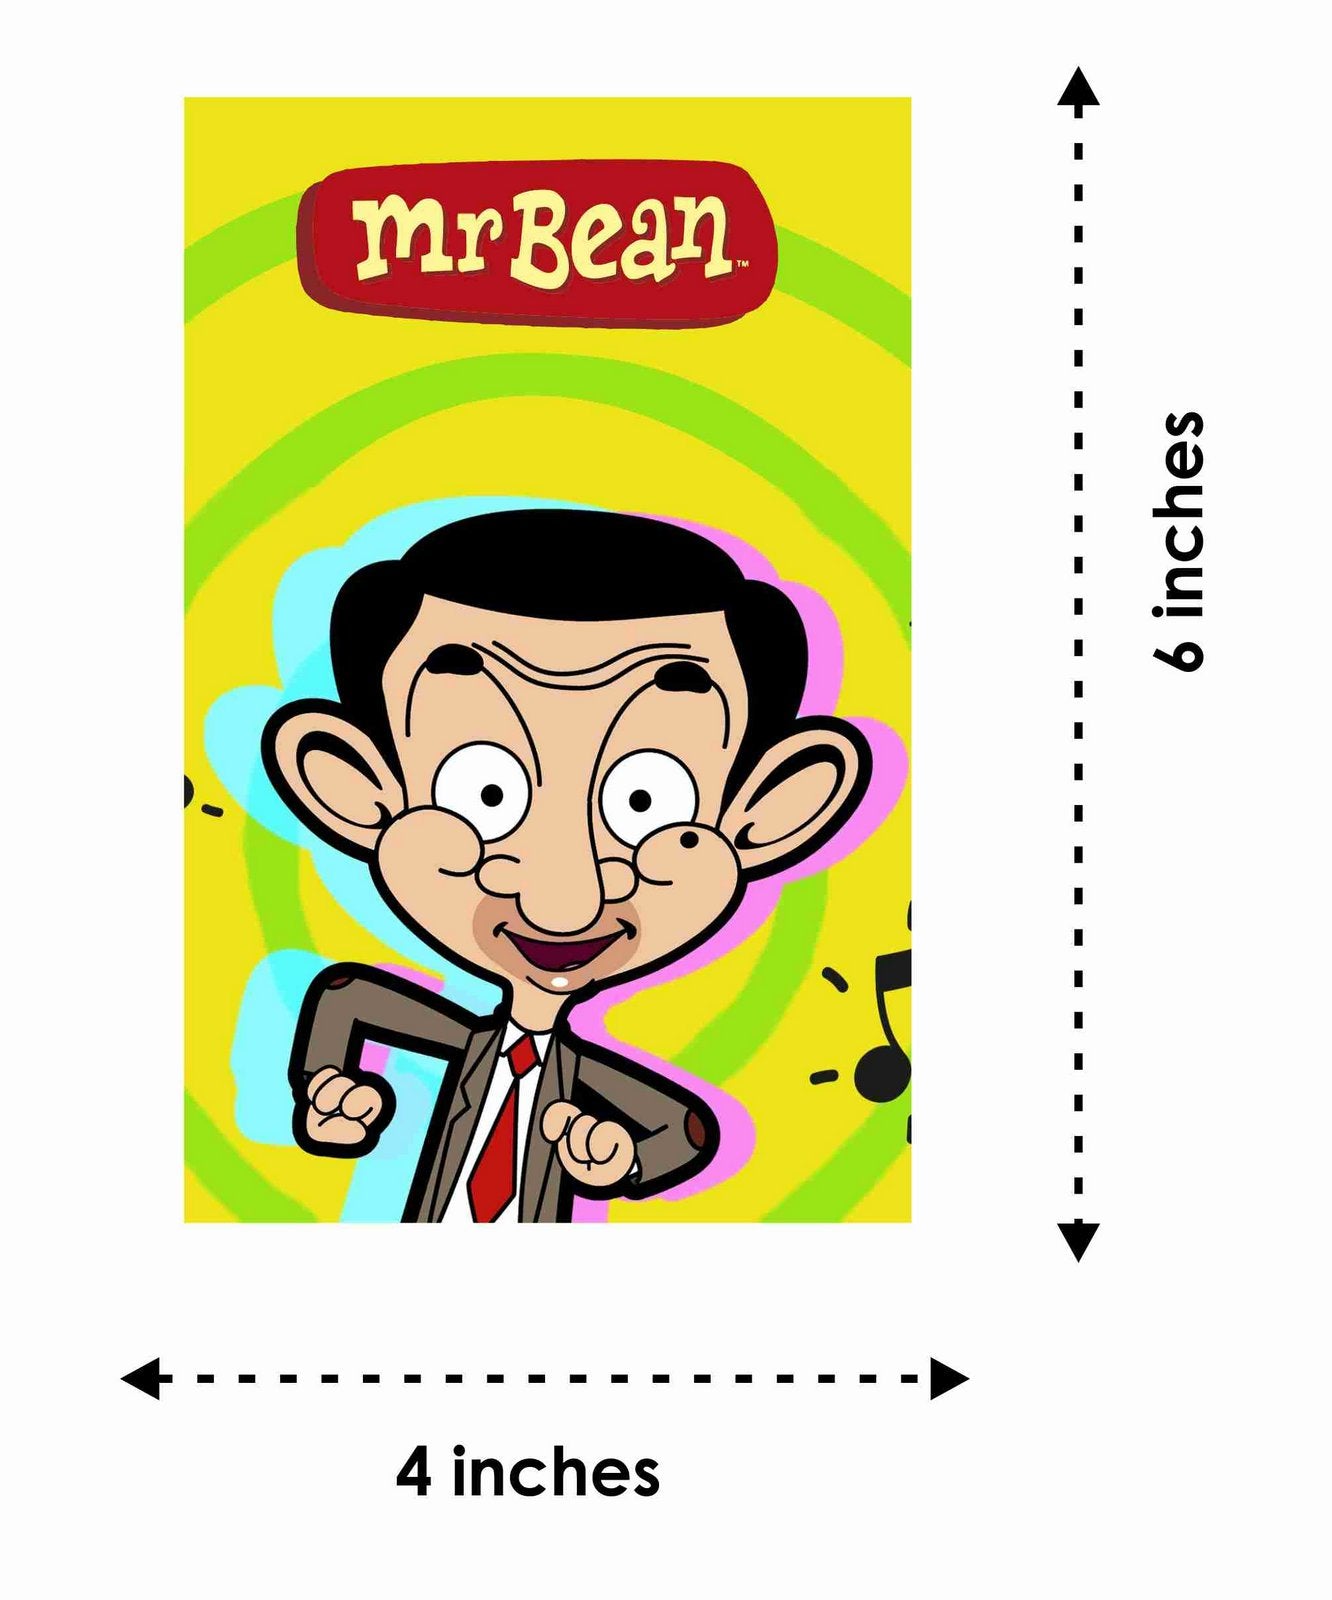 Mr Bean Theme Children's Birthday Party Invitations Cards with Envelopes - Kids Birthday Party Invitations for Boys or Girls,- Invitation Cards (Pack of 10)